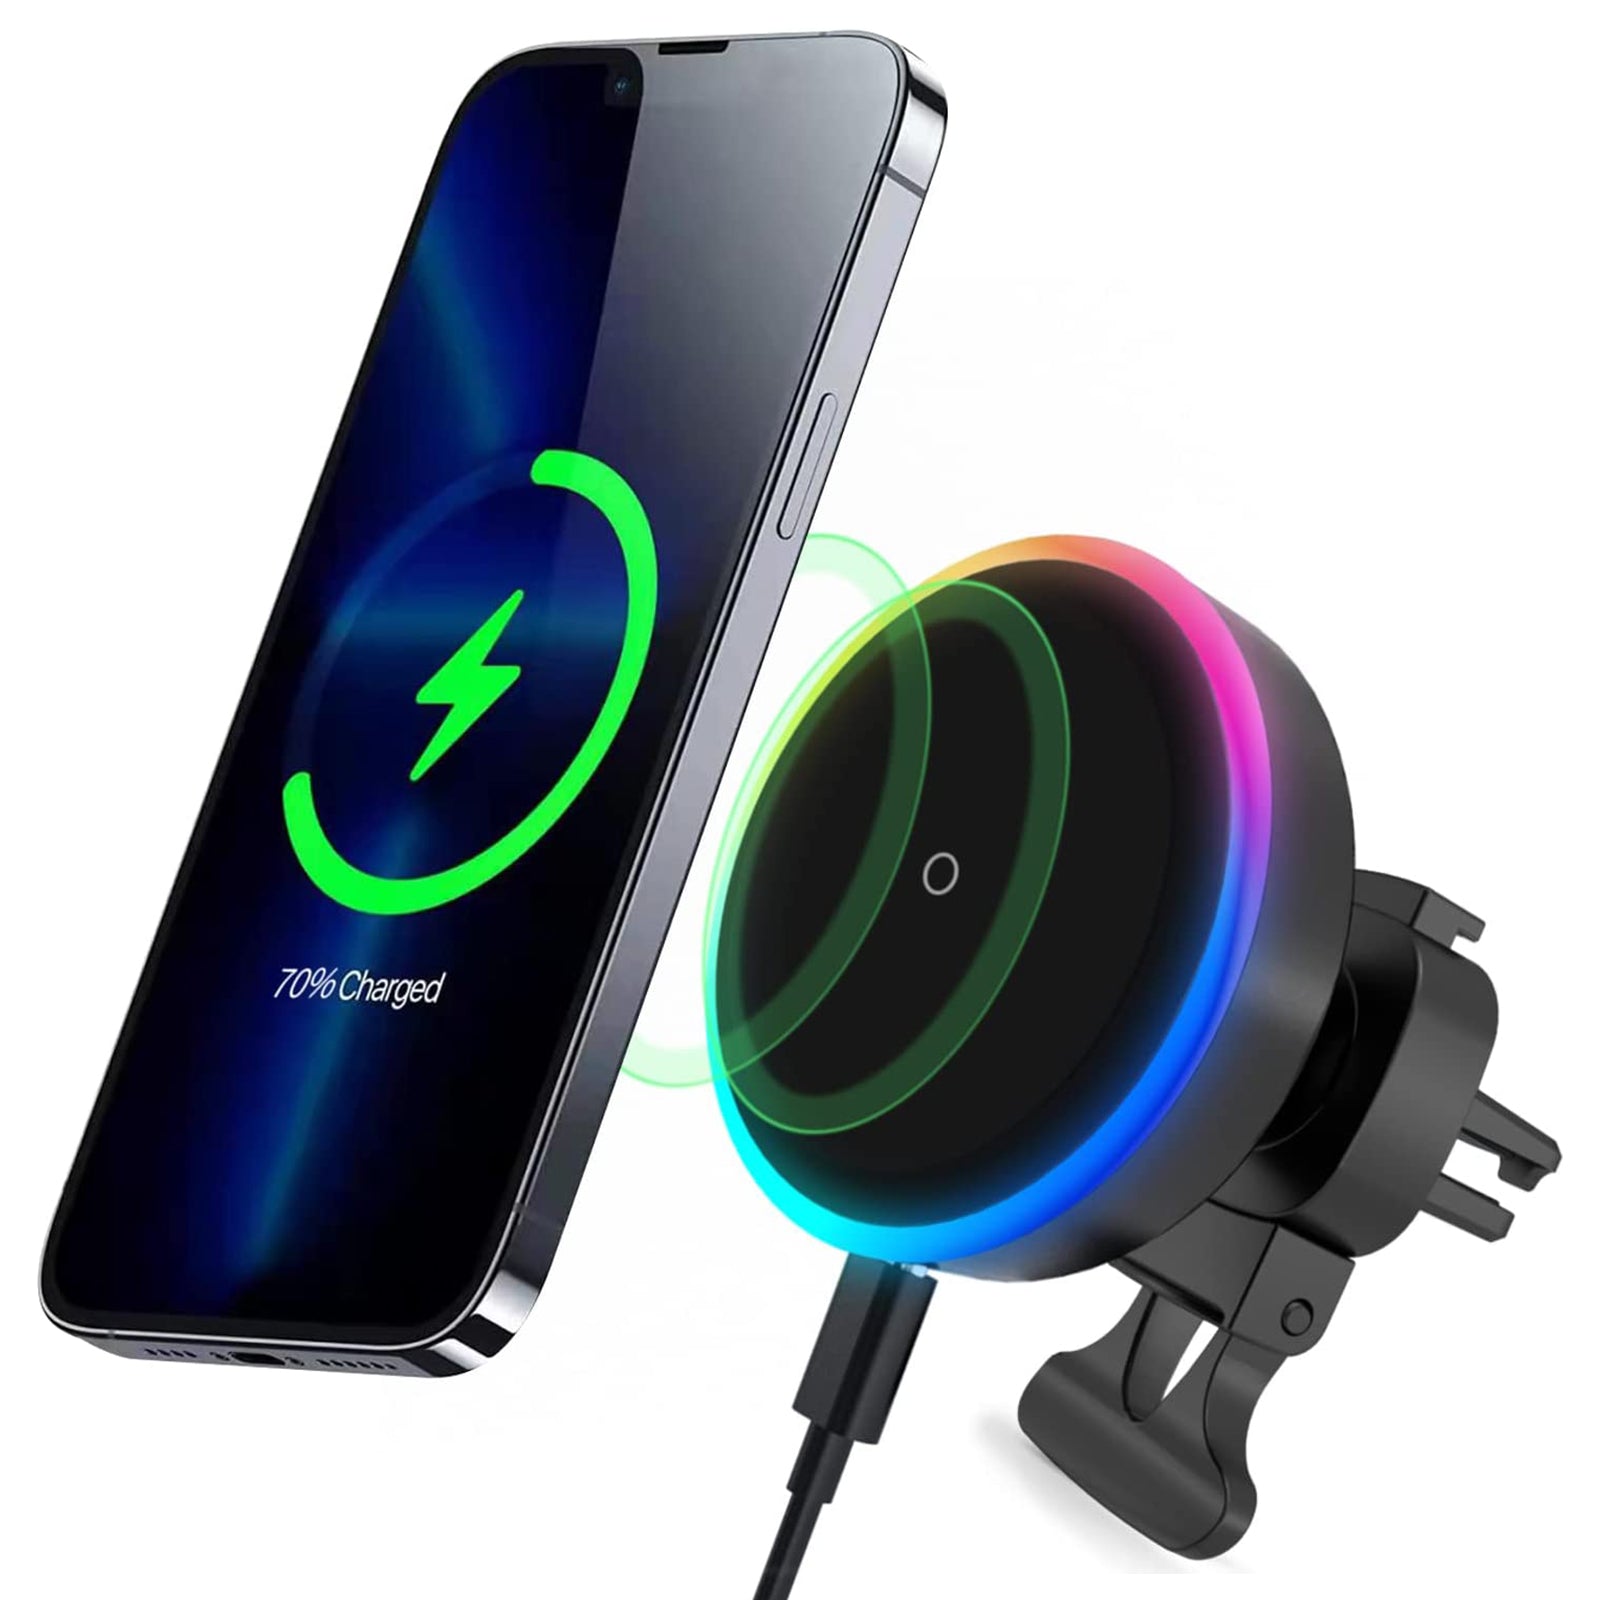  Car Cigarette Lighter Wireless Charger- Phone Holder Mount,Automatic  Infrared Smart Sensing 15W Qi Fast Wireless Charging Cradle for Cell Phone,Dual  USB, Double QC3.0 Output : Cell Phones & Accessories